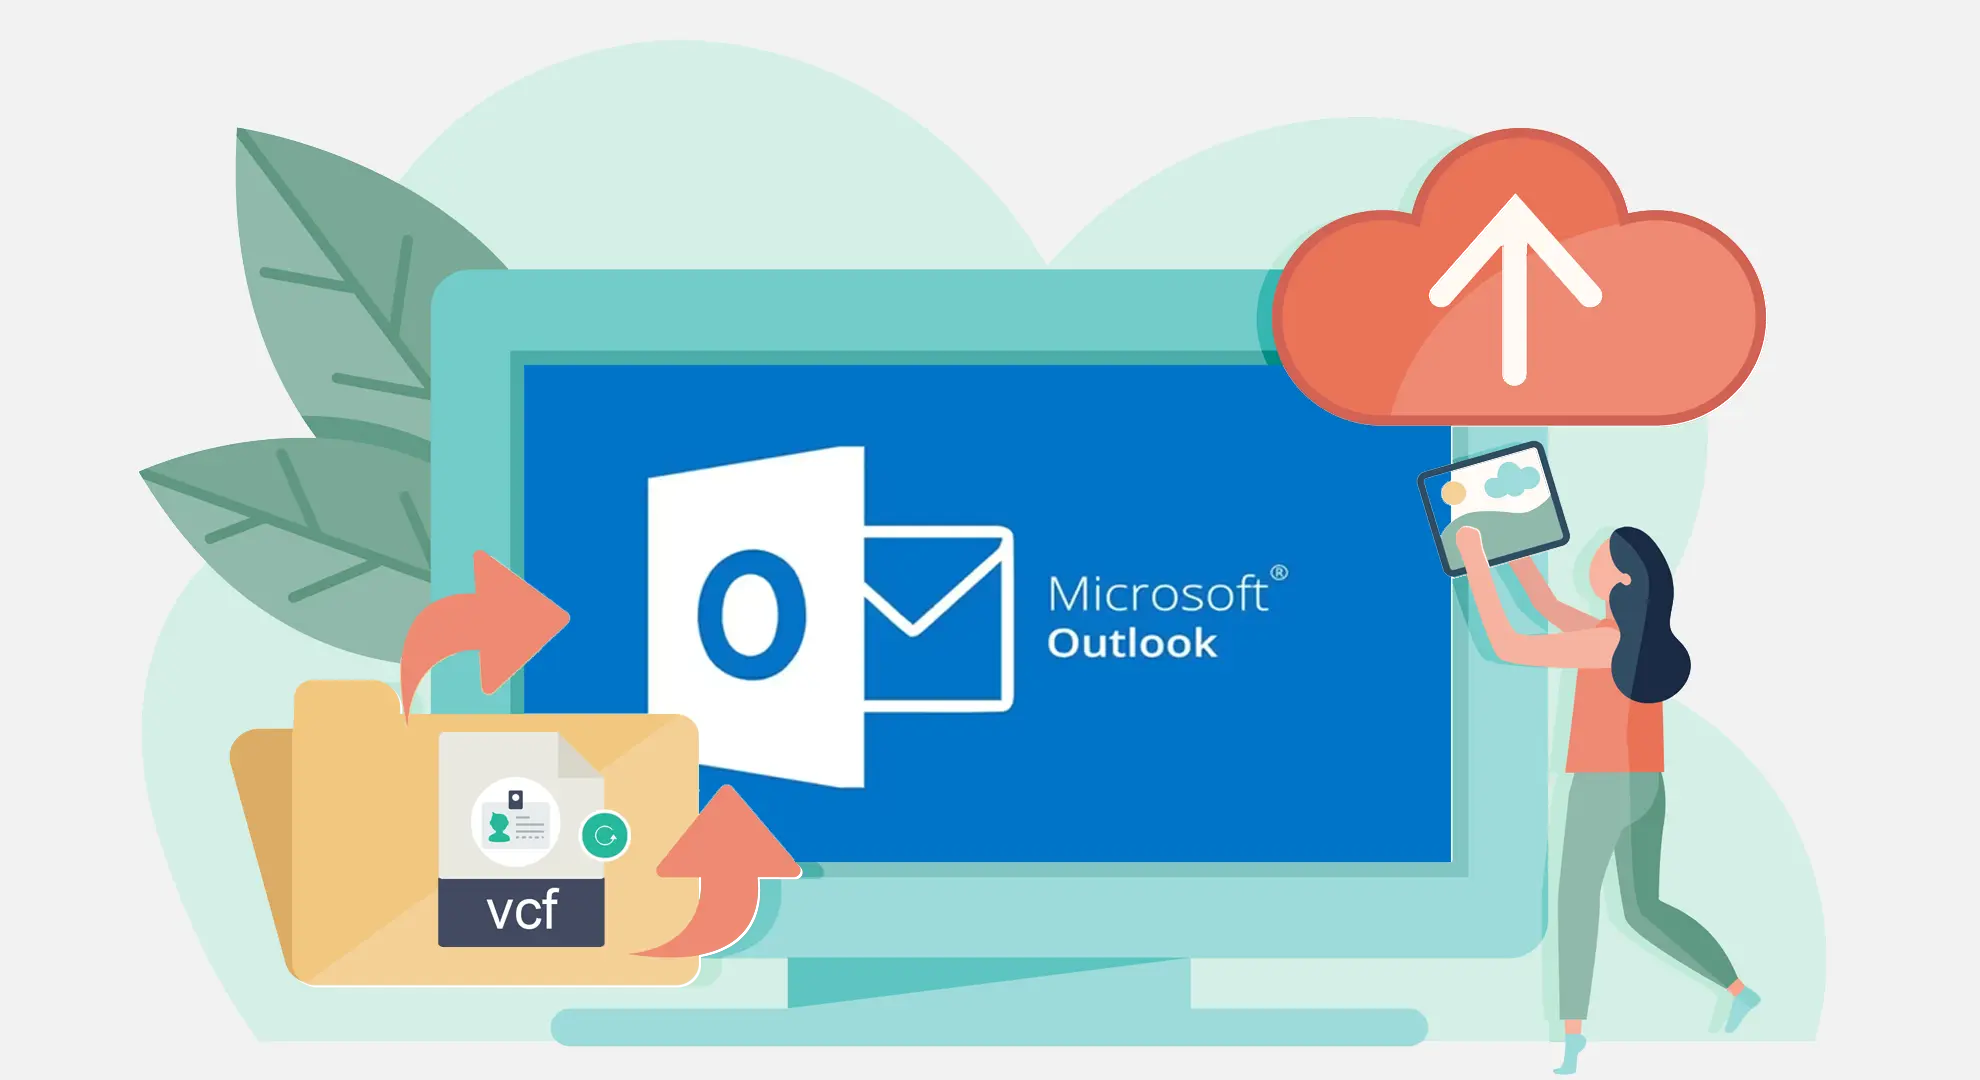 Easy Steps to Add or Import VCF/vCard Files in Microsoft Outlook